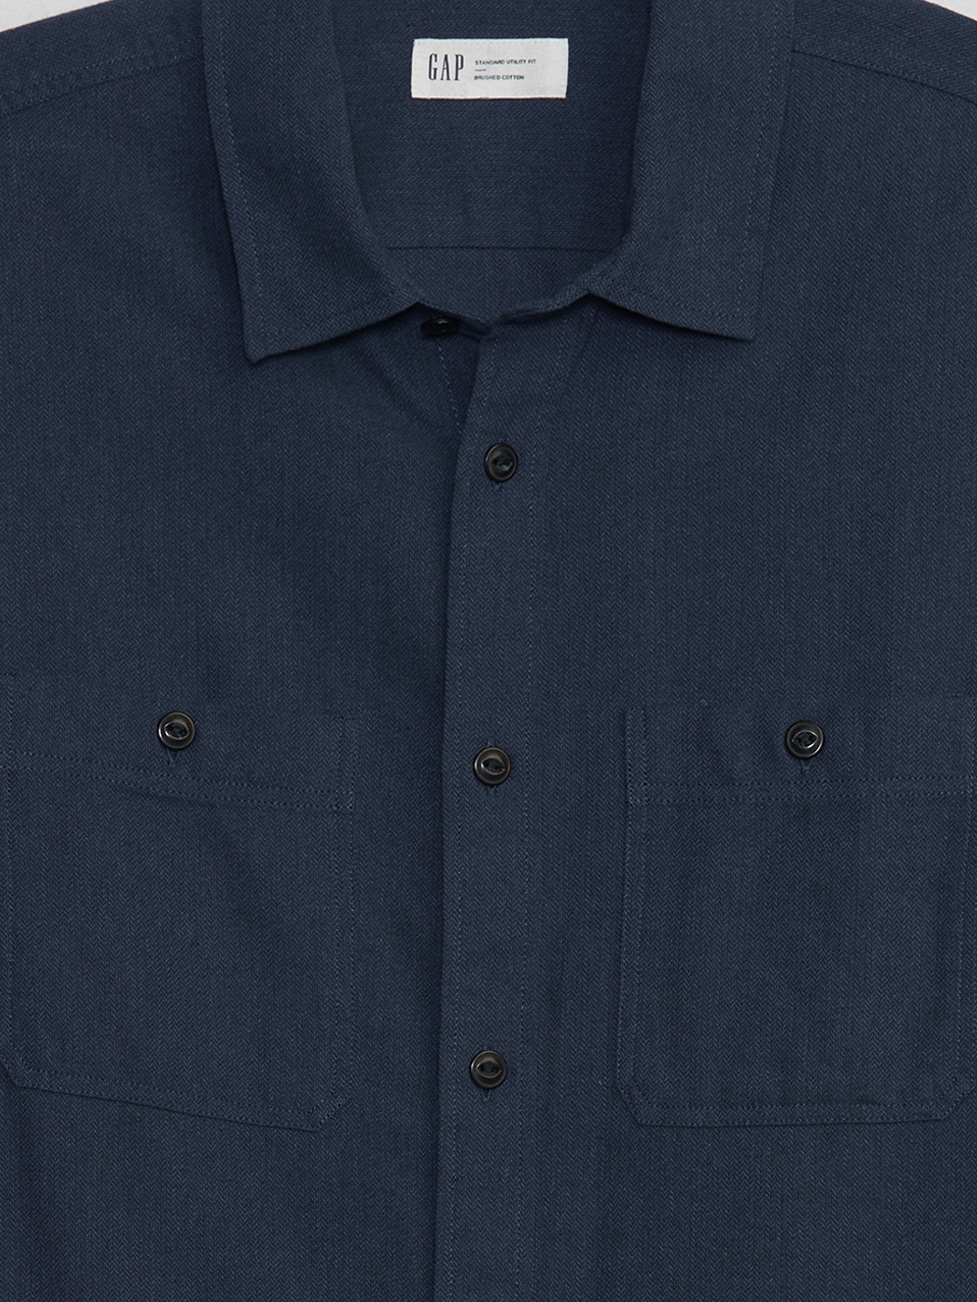 Utility Shirt in Standard Fit | Gap Factory